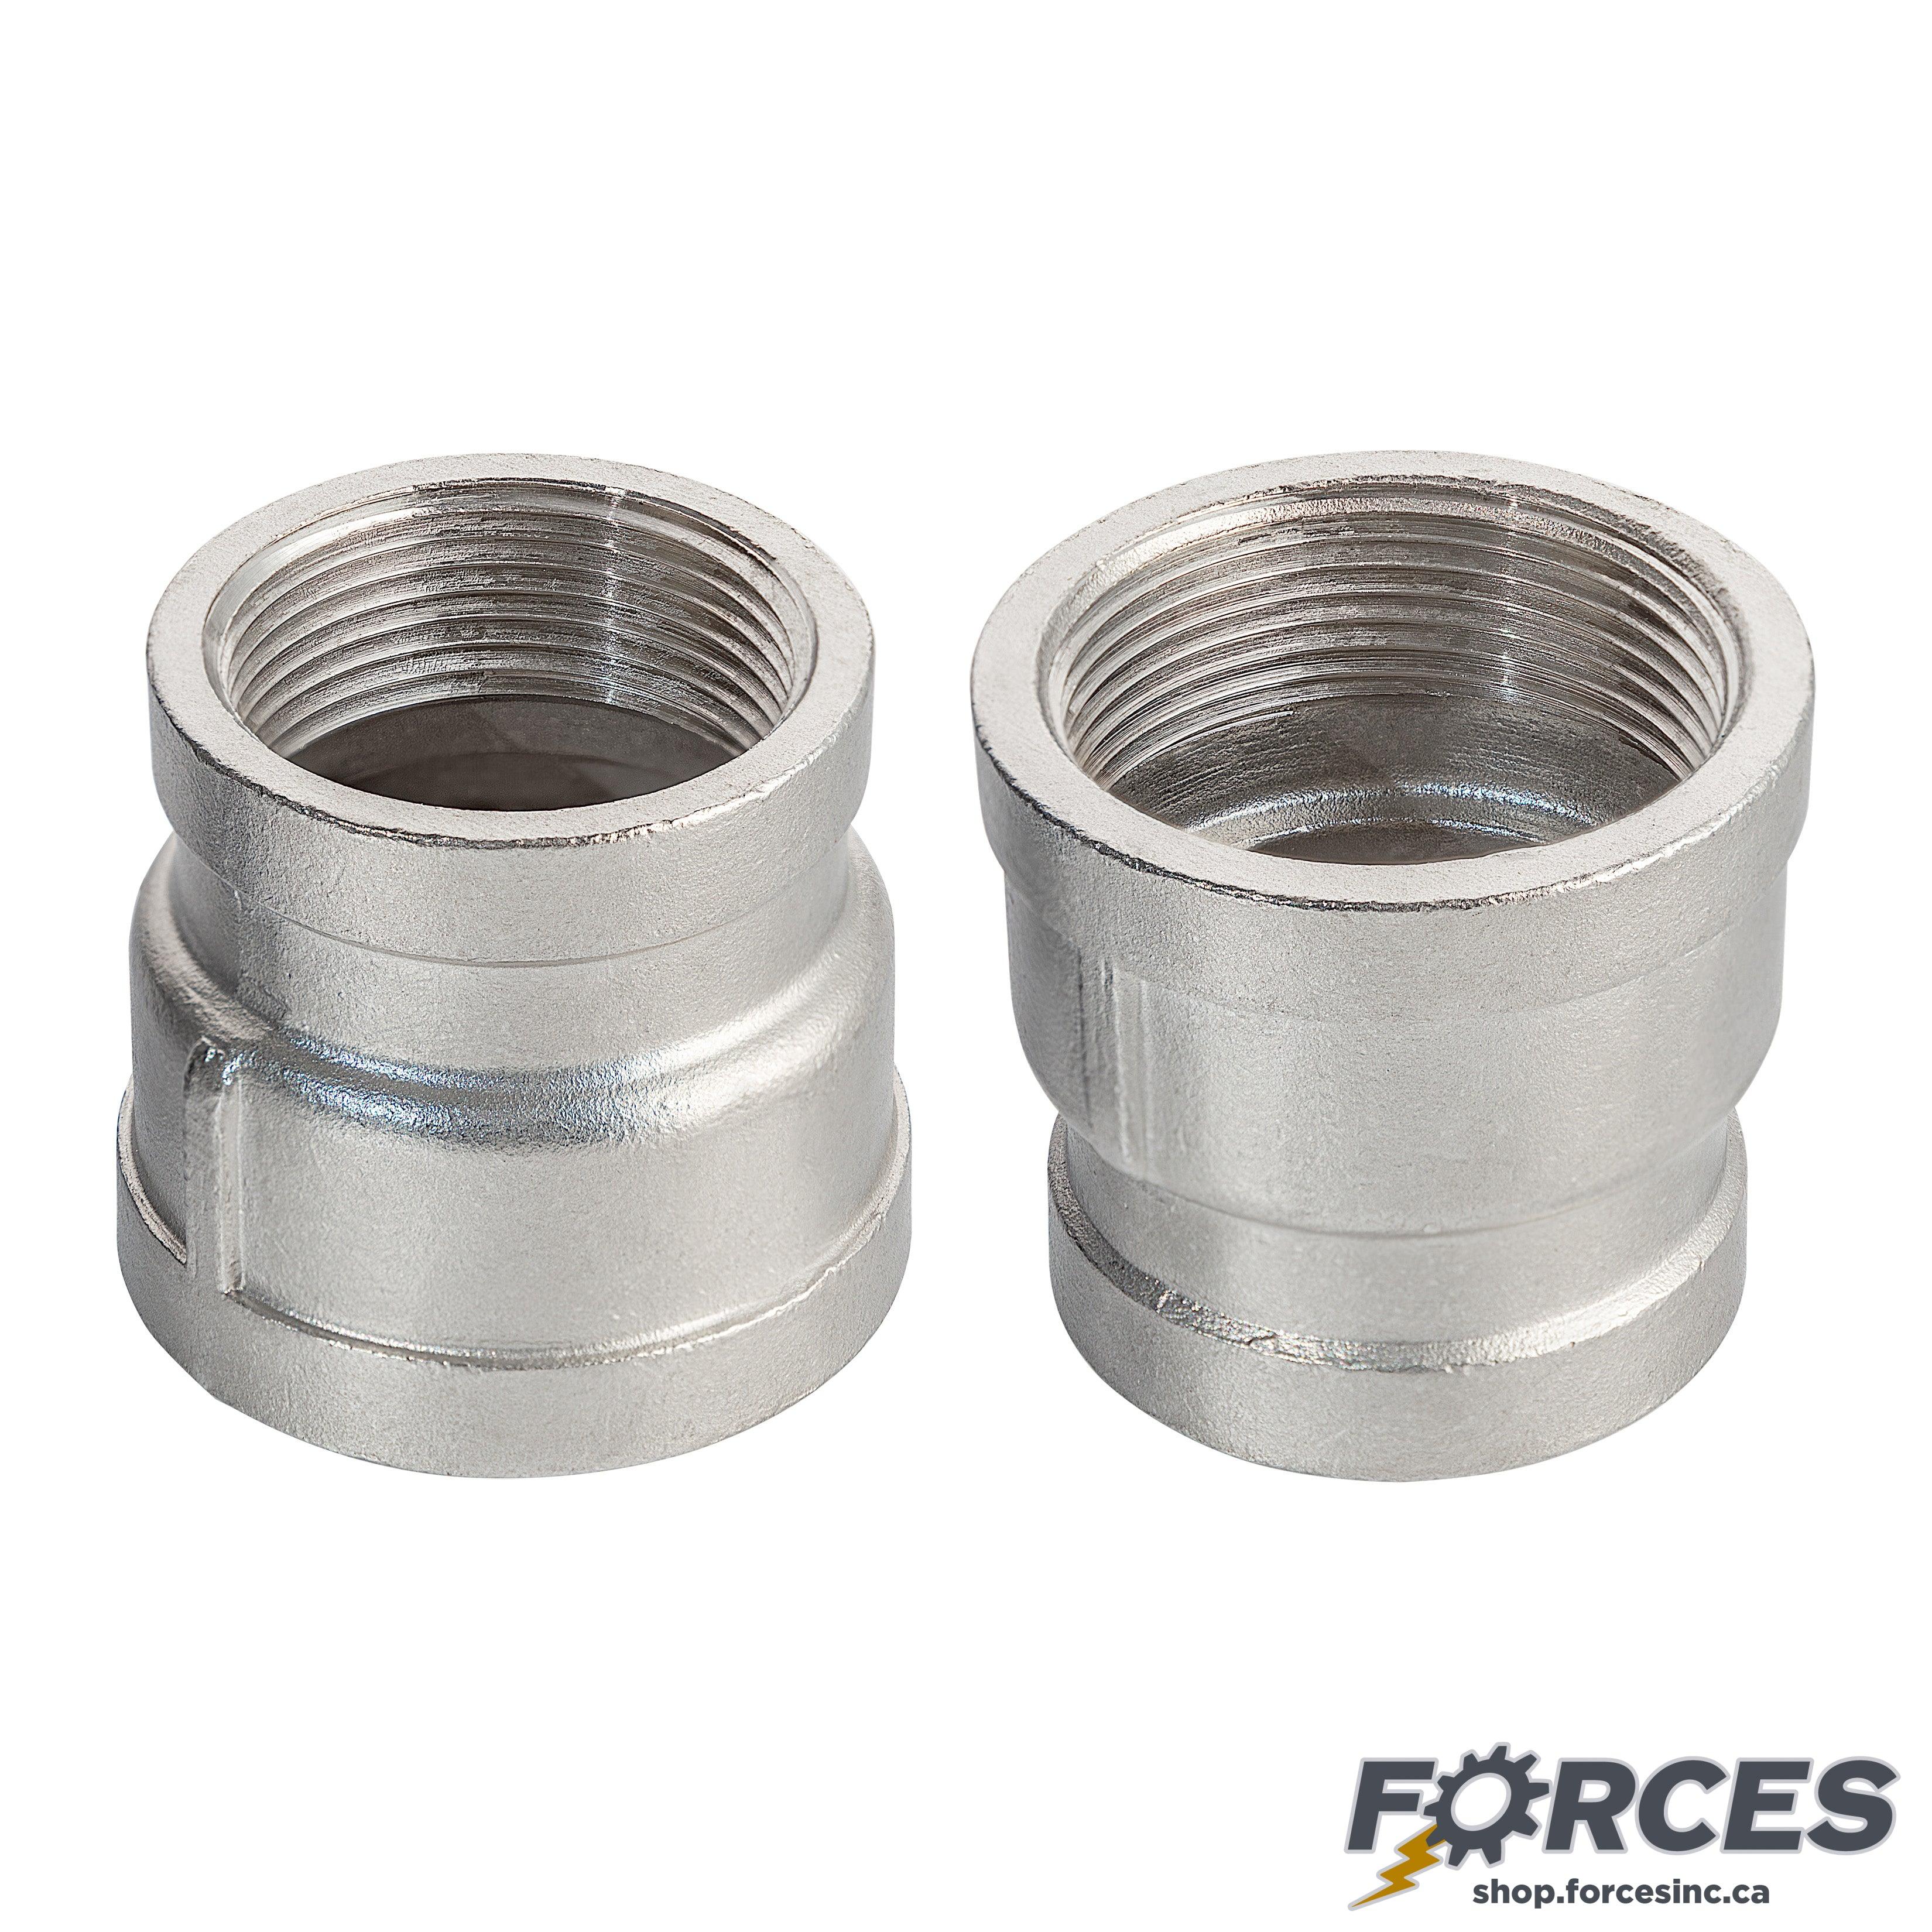 1-1/2" x 1" Coupling Reducer NPT #150 - Stainless Steel 316 - Forces Inc